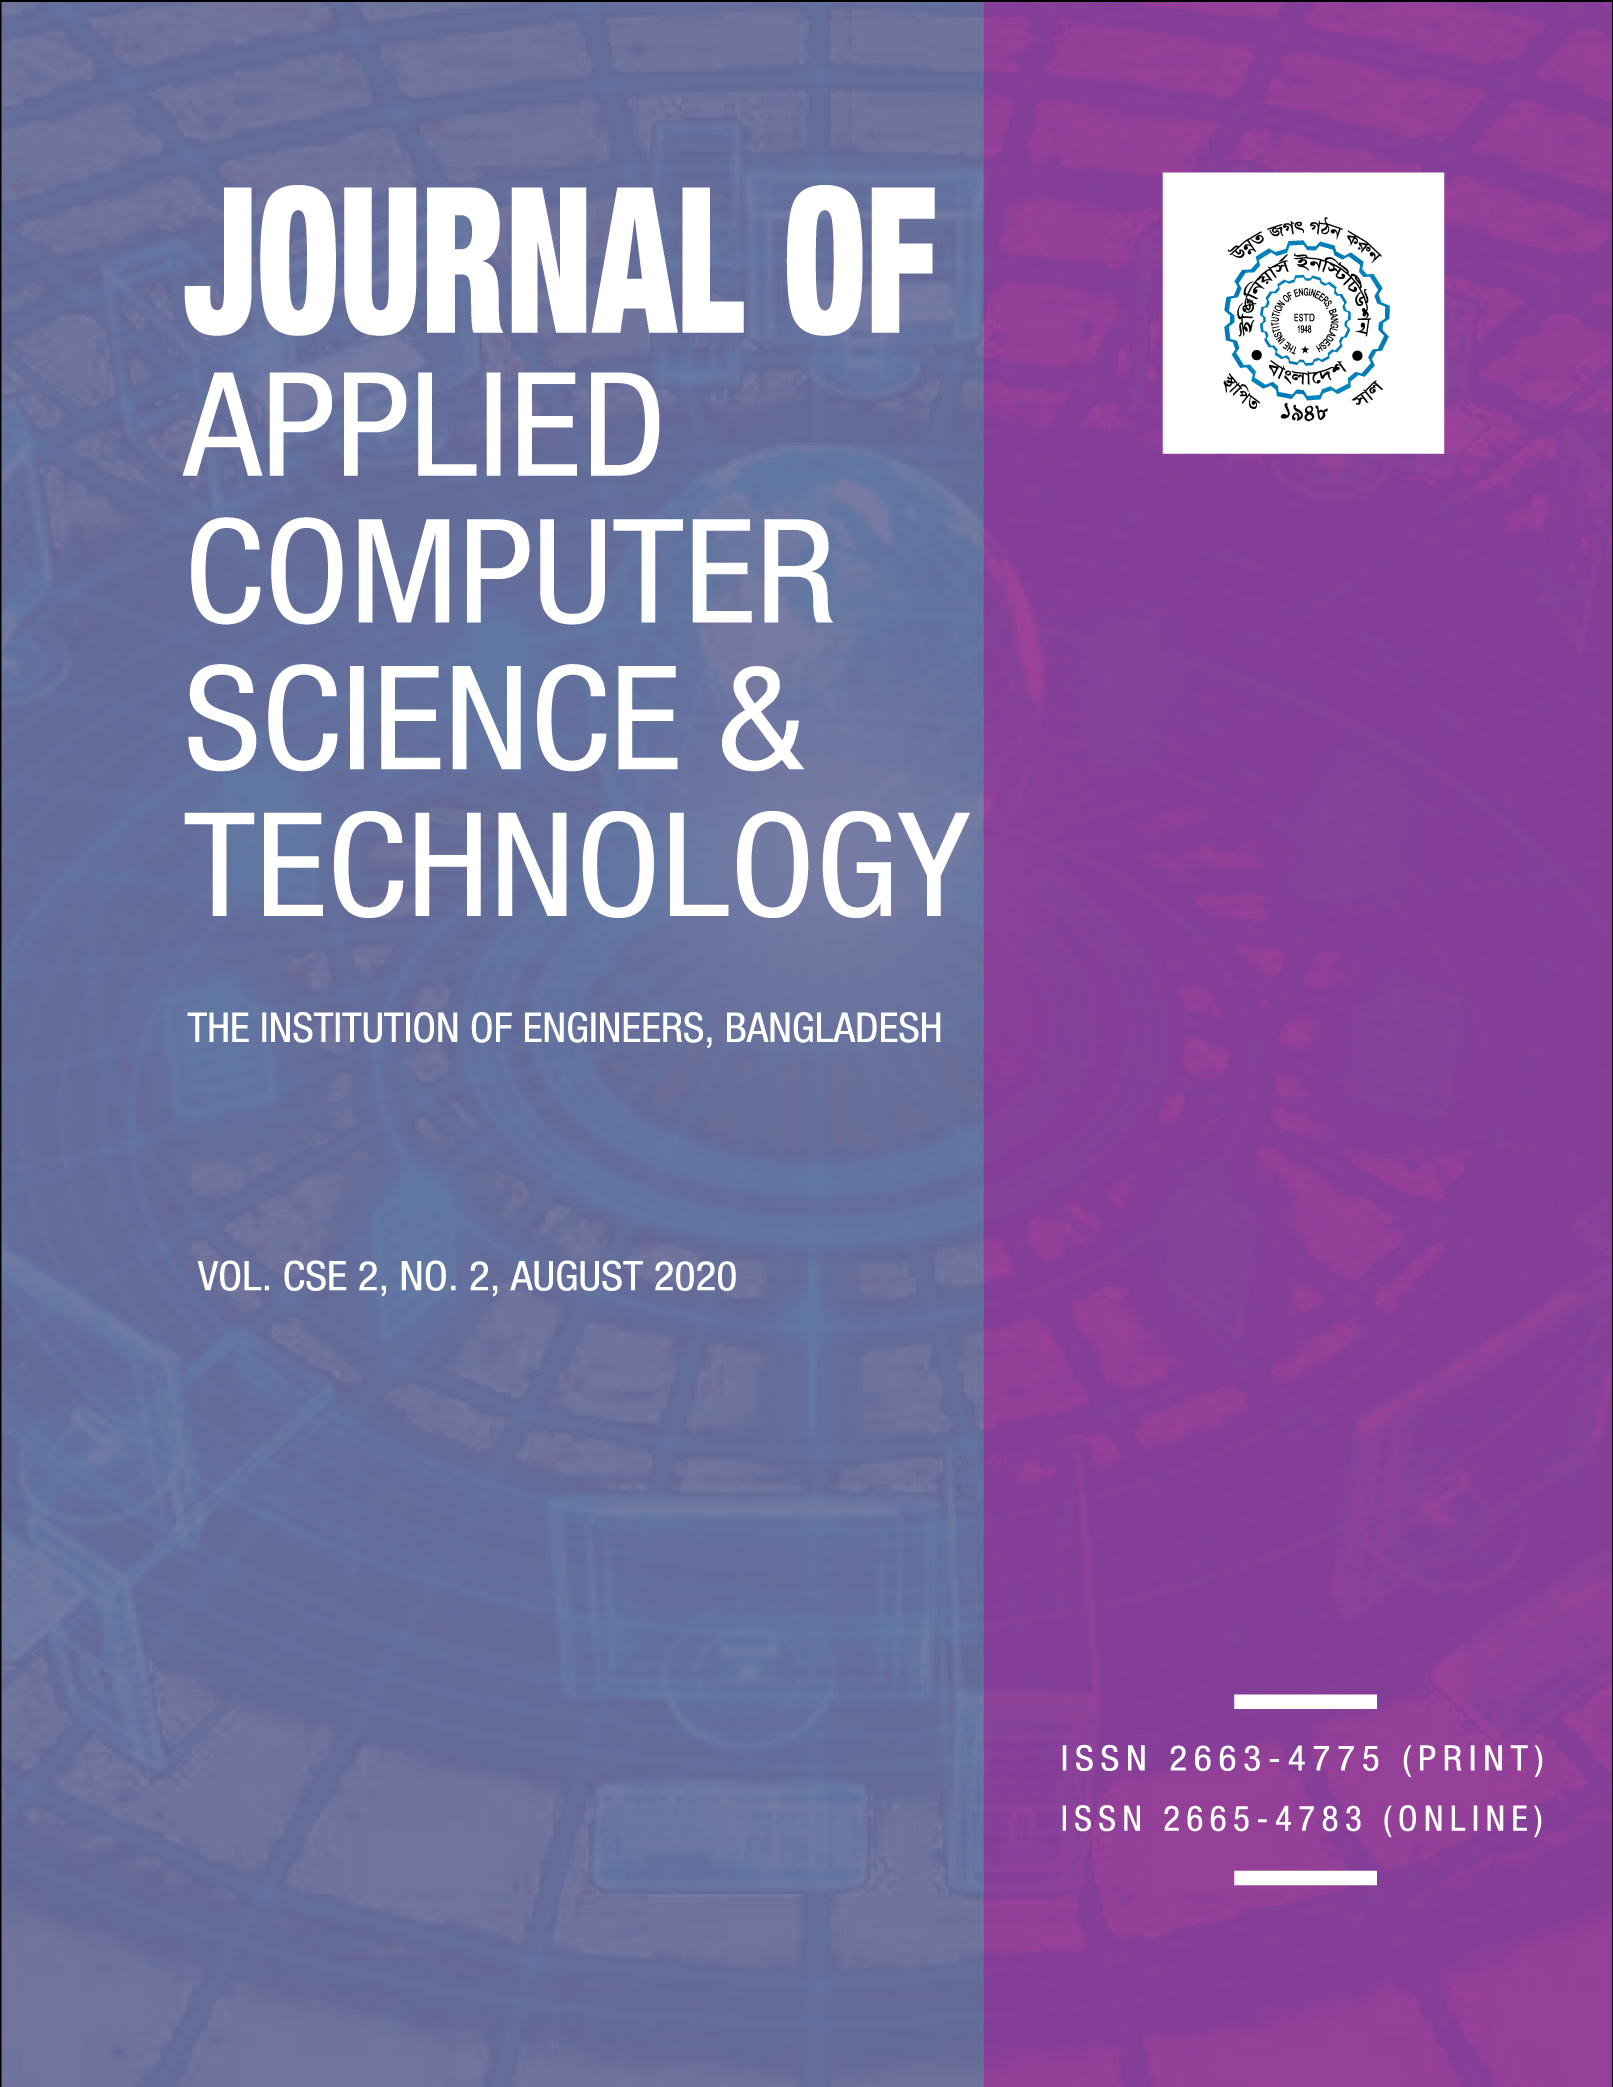 Journal of Applied Computer Science & Technology Vol:  CSE 2, No. 2, August 2020